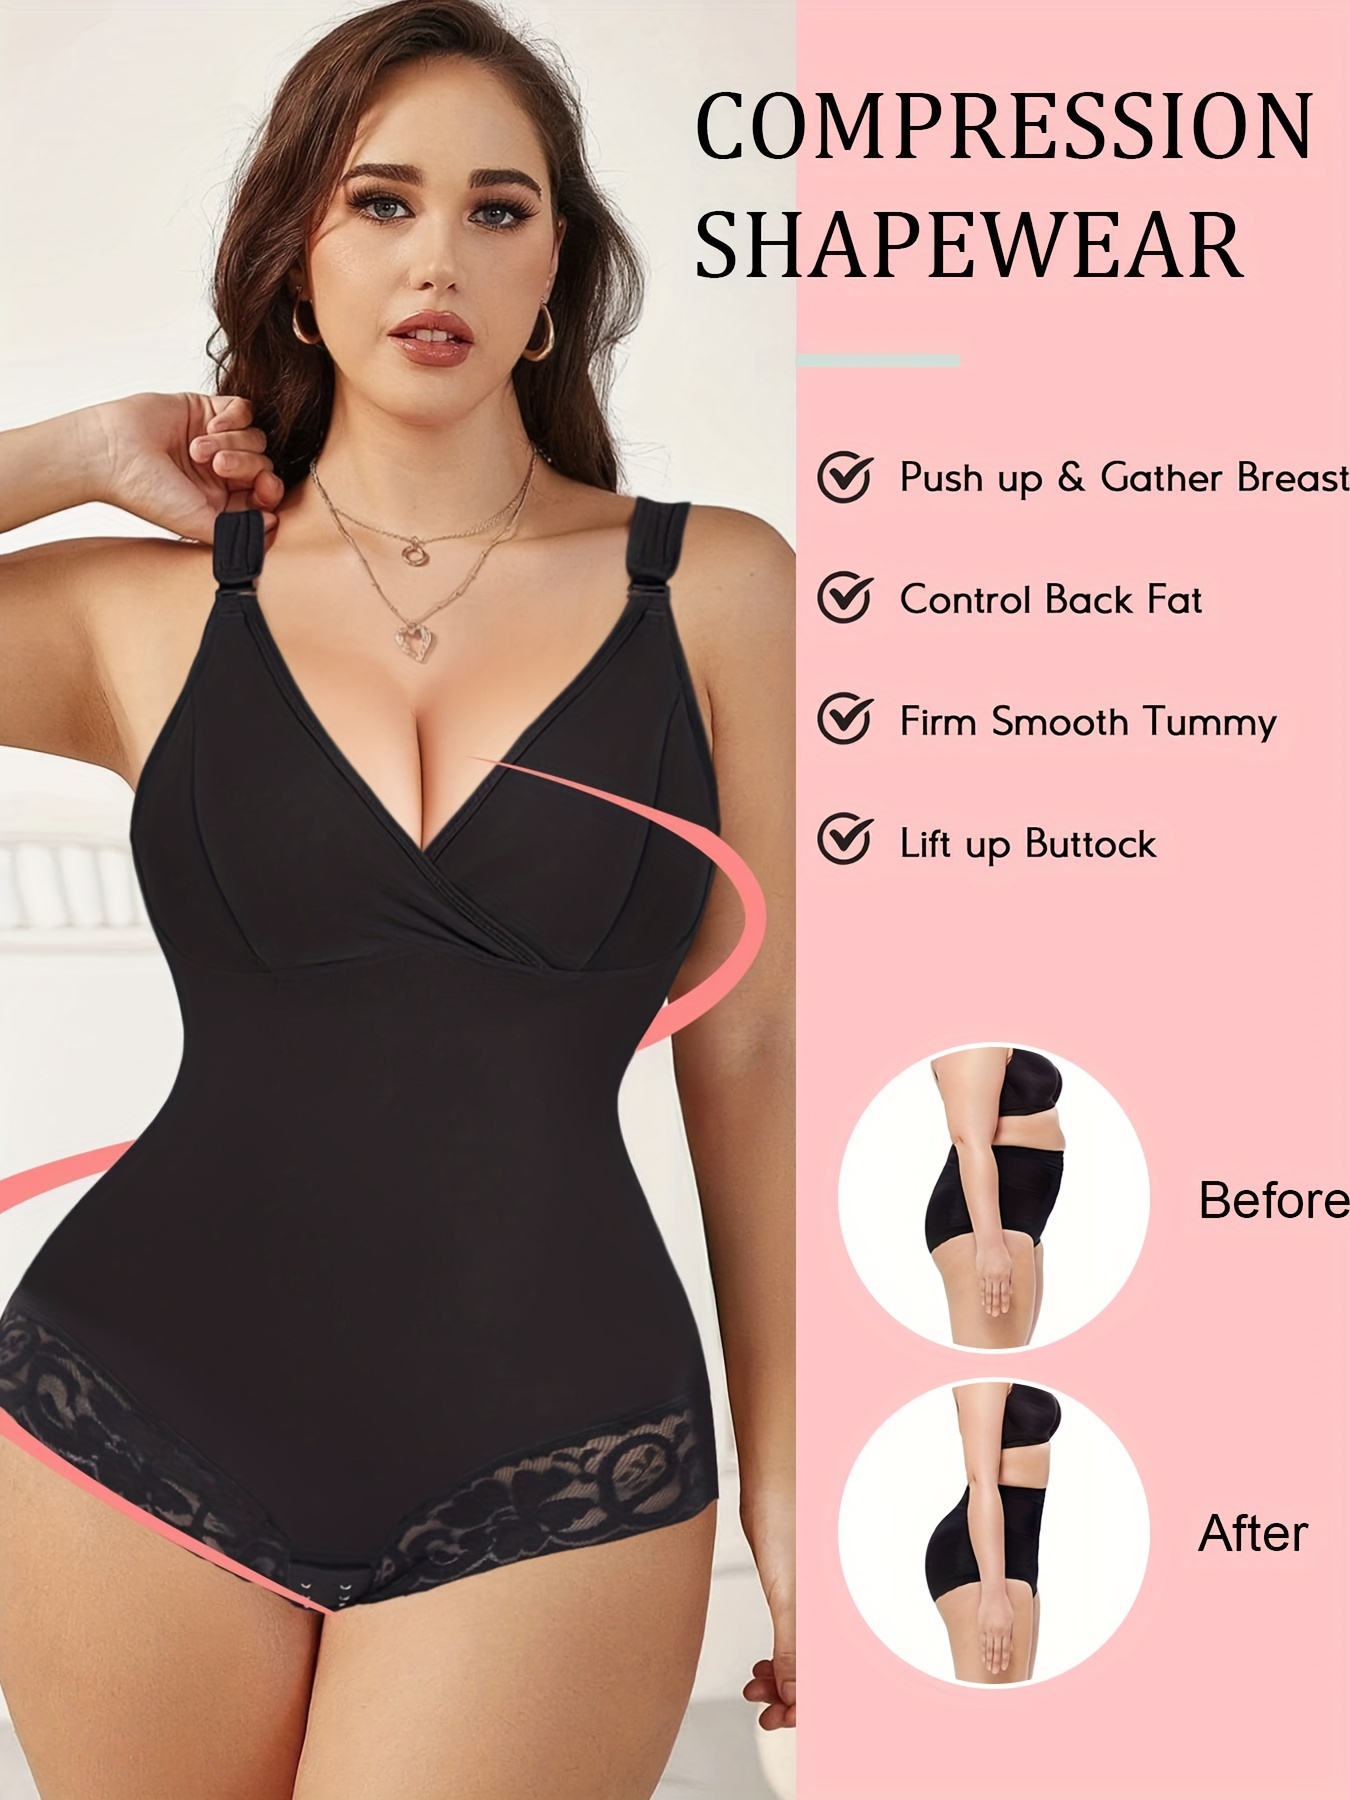 Lifts the girls, and smooths out back fat with a shapewear